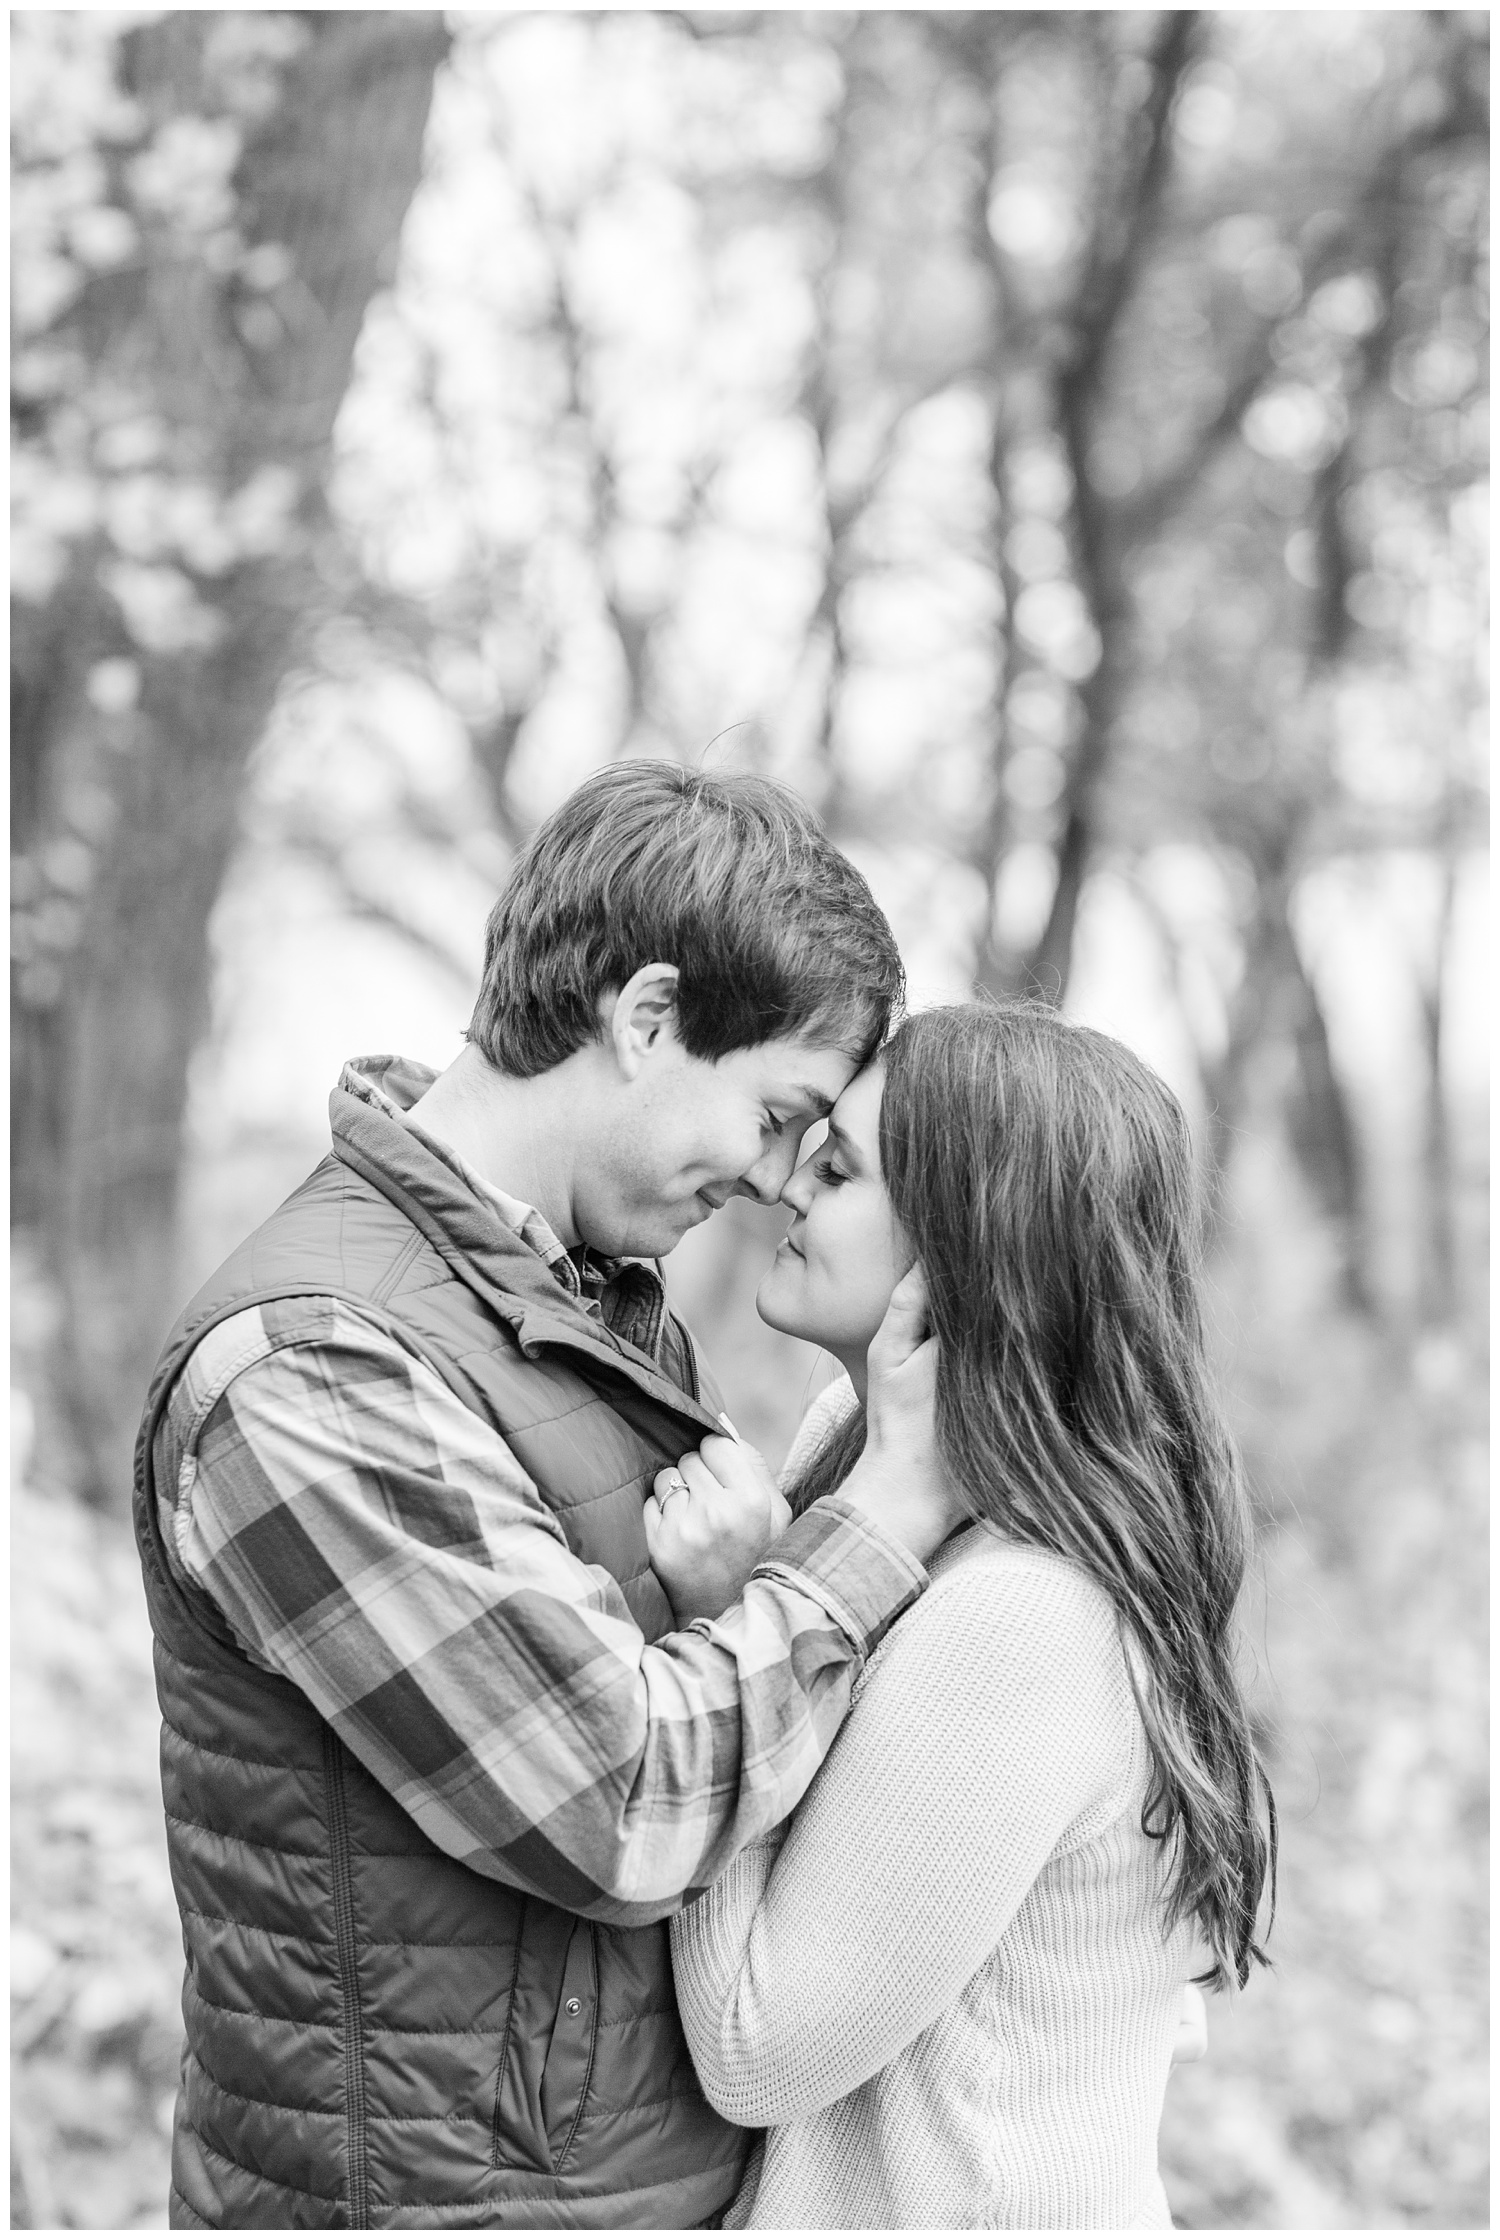 Fall in Iowa, Brady slowly pulls Jenna in for a kiss in the middle of an autumn path at Lost Island Nature Center | CB Studio